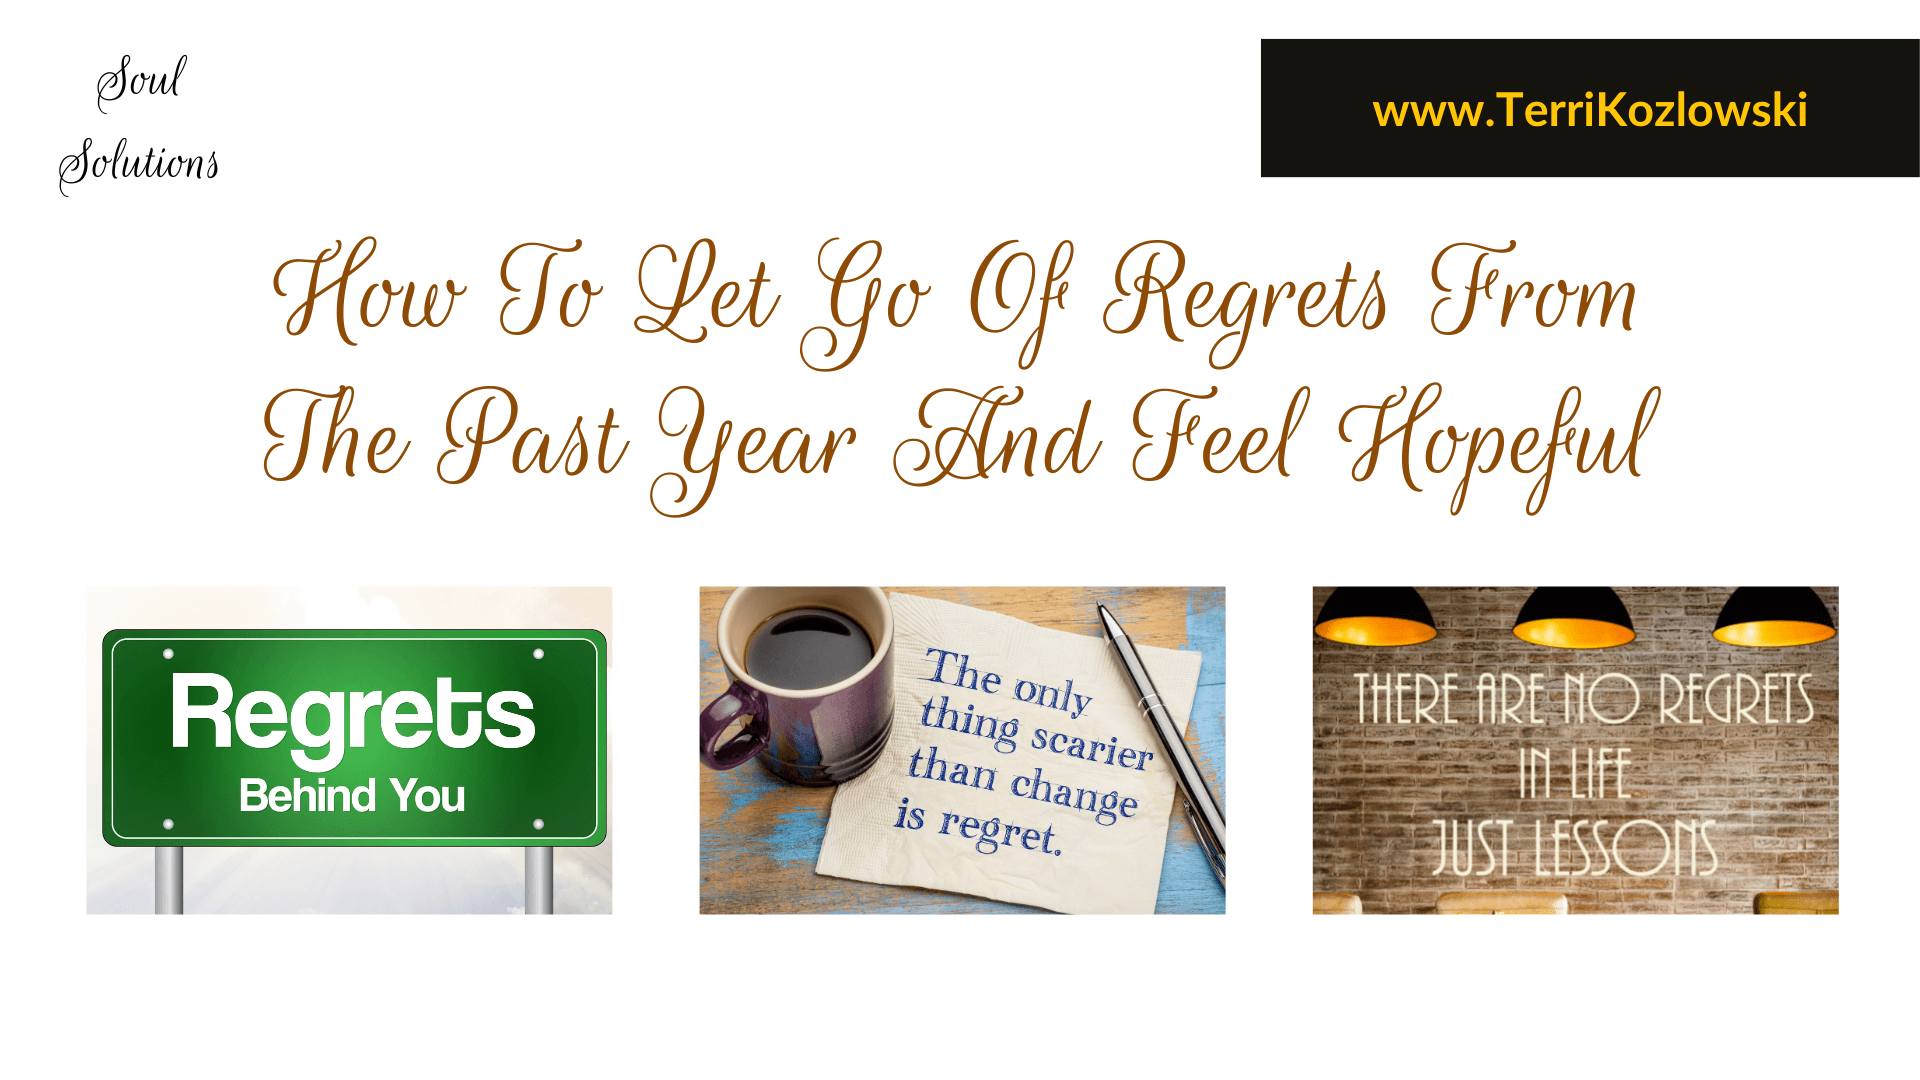 How To Let Go Of Regrets From The Past Year And Feel Hopeful